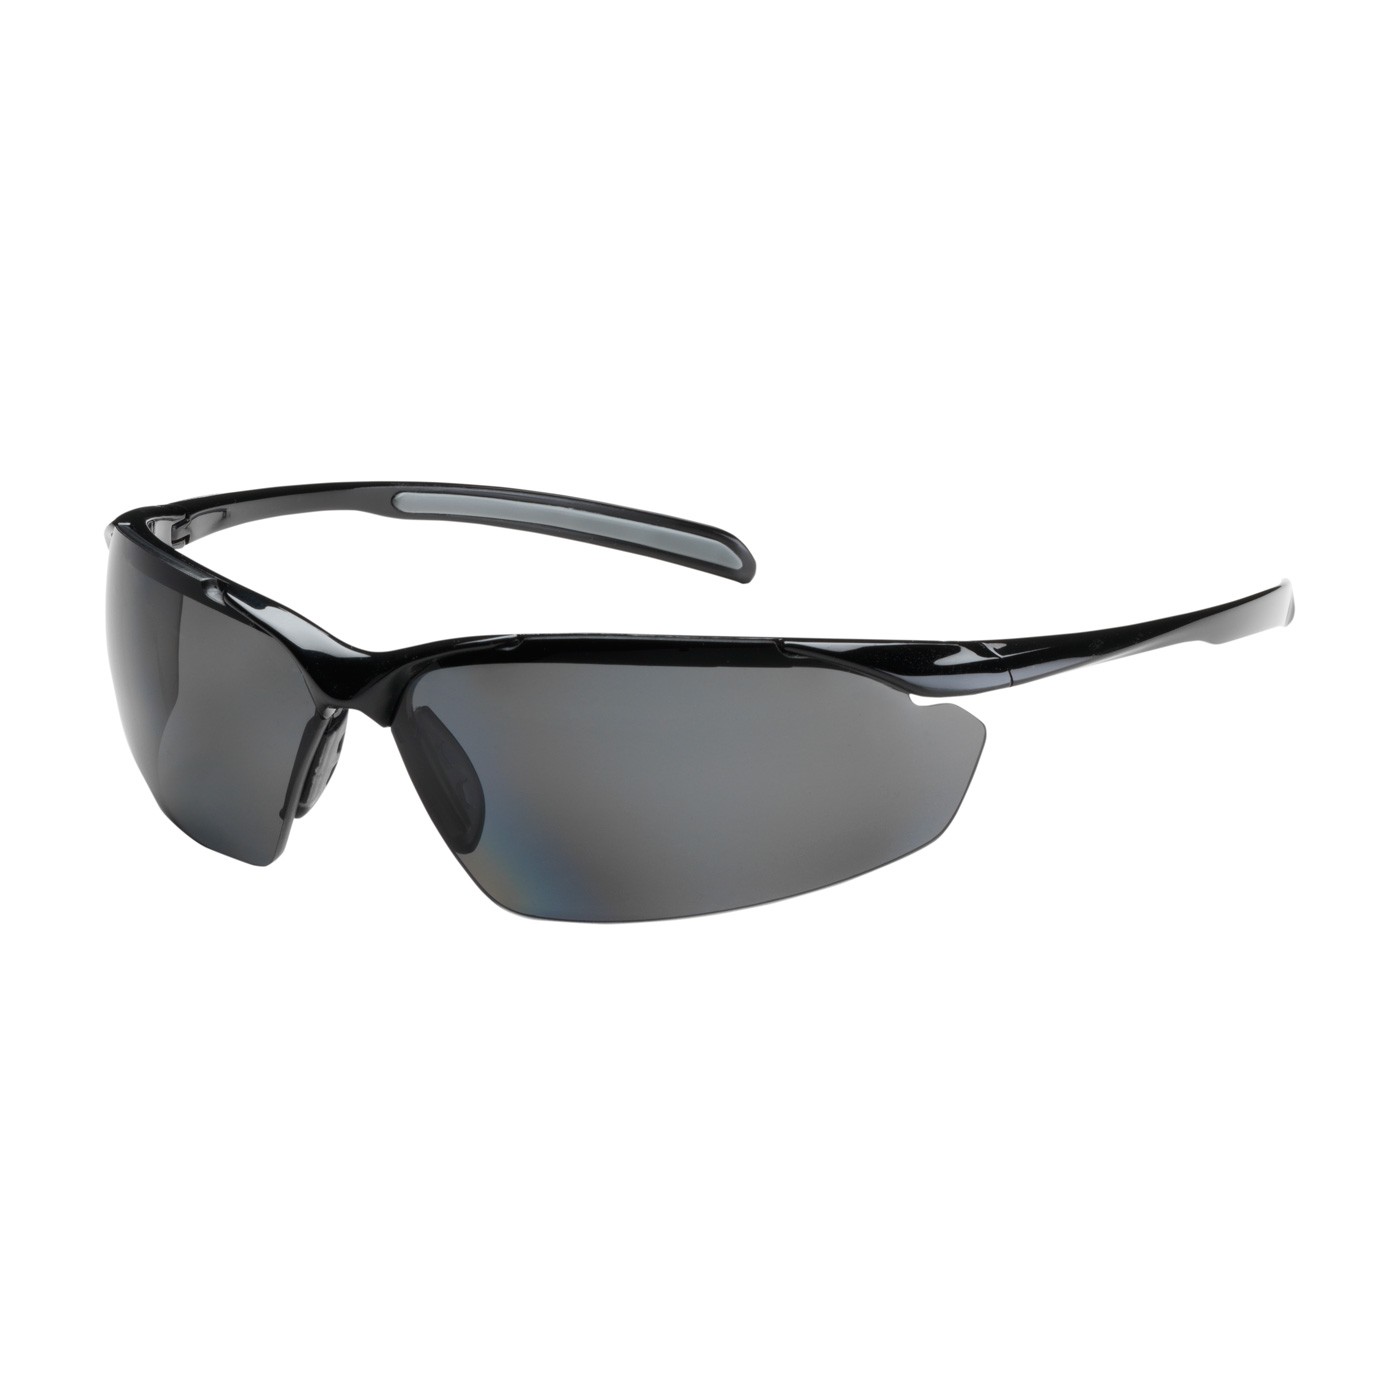 Commander™ Semi-Rimless Safety Glasses with Gloss Black Frame, Polarized Gray Lens and Anti-Scratch Coating  (#250-33-0041)